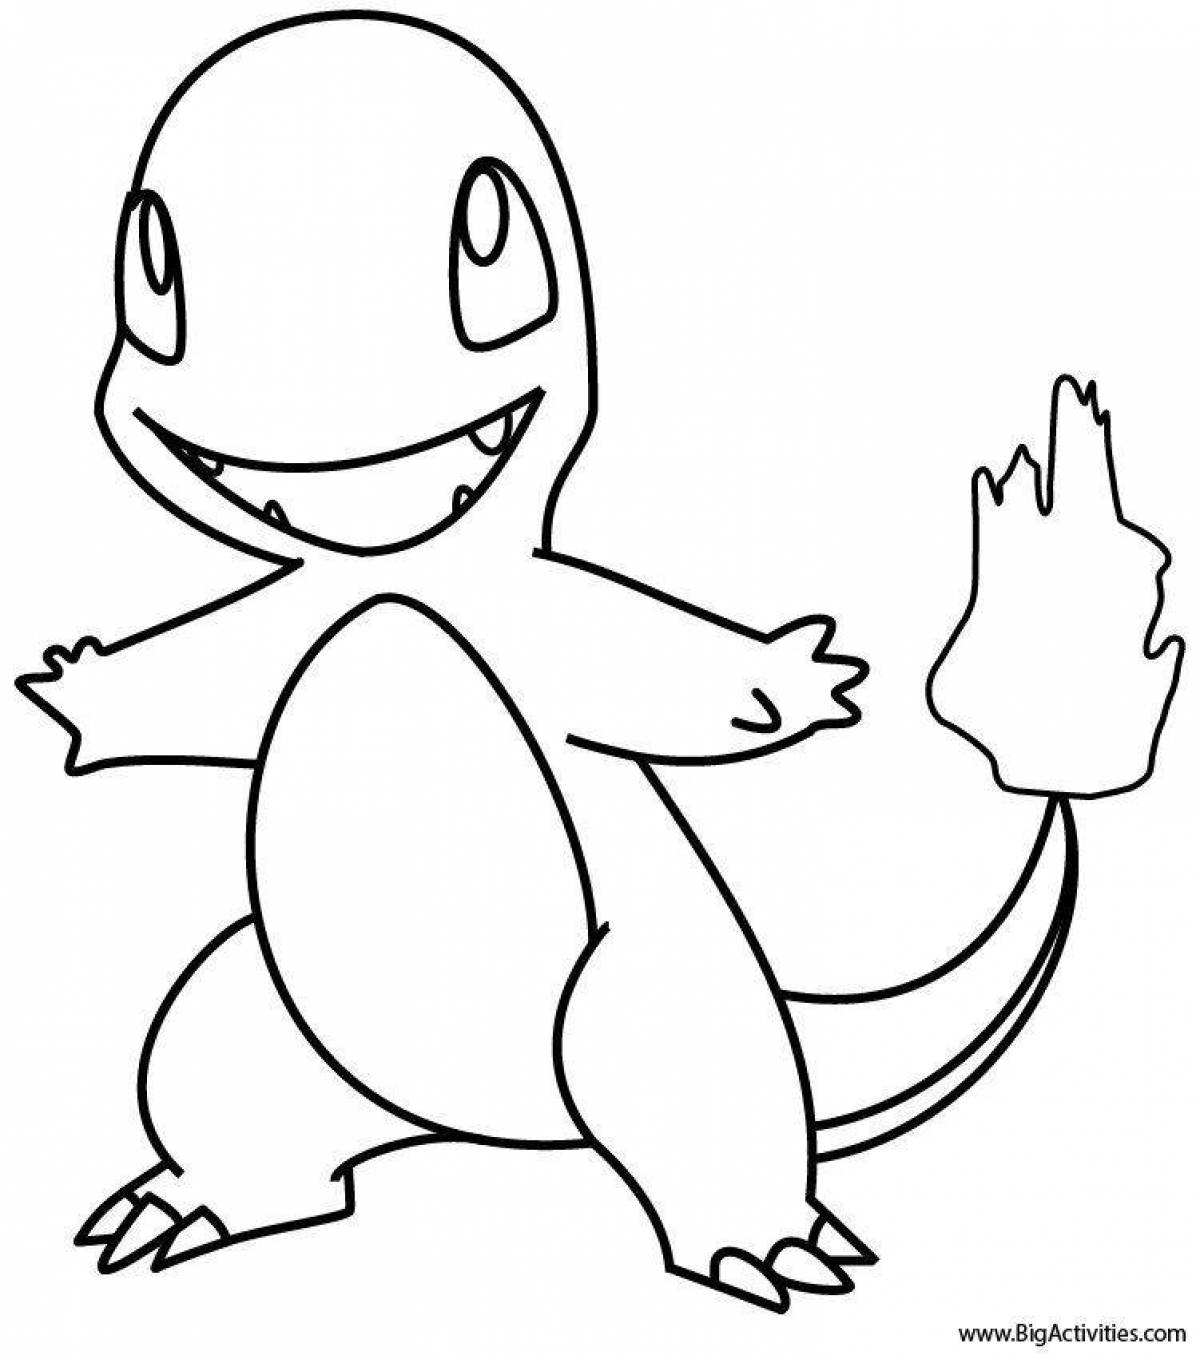 Lovely charmander pokemon coloring page